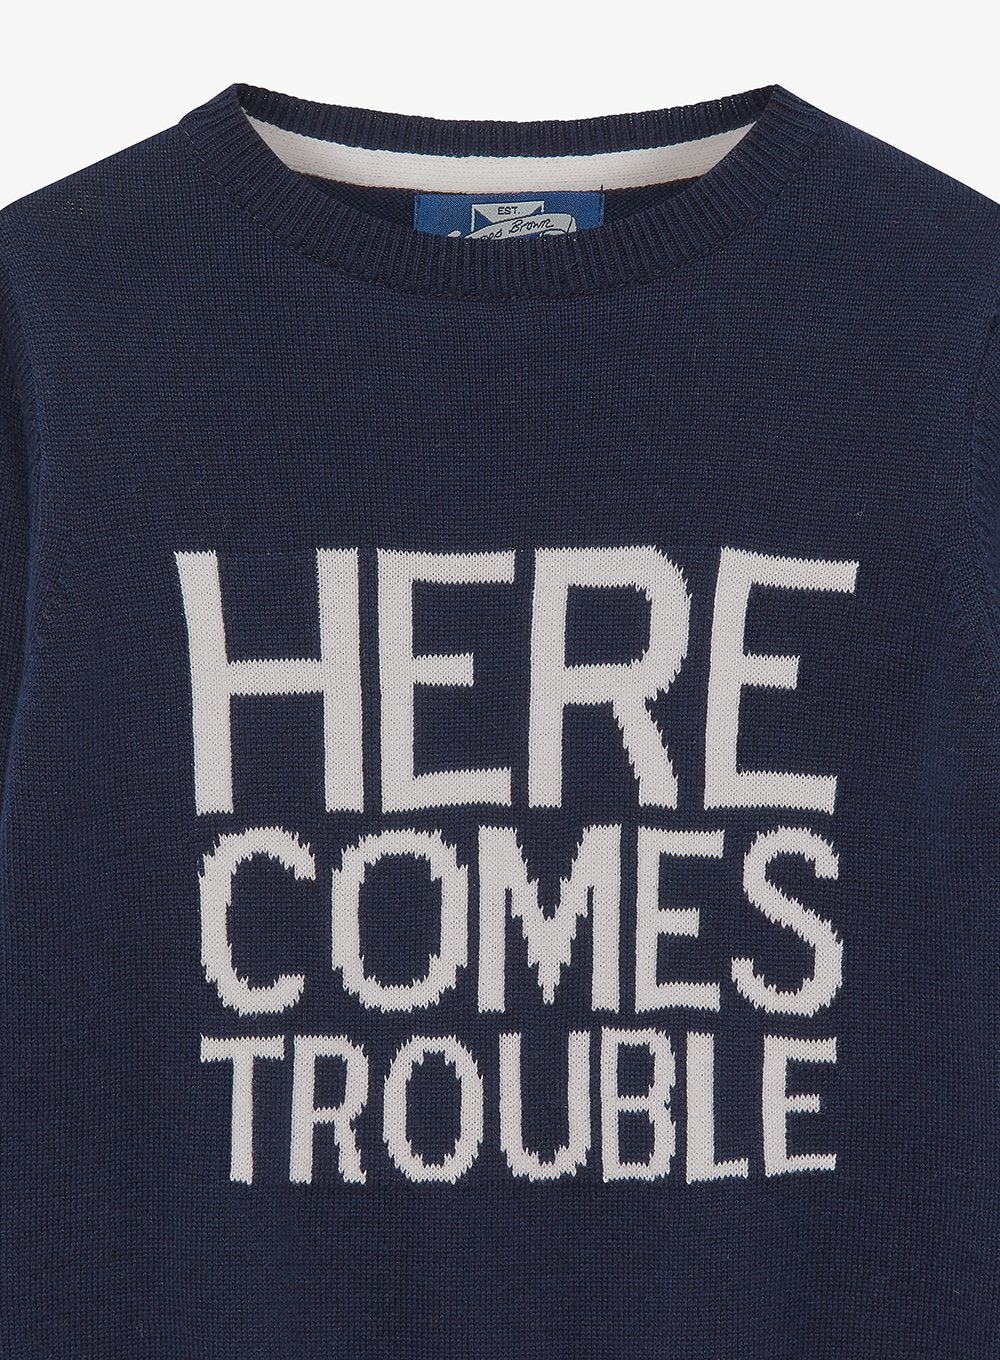 Thomas Brown Jumper Here Comes Trouble Jumper in Navy